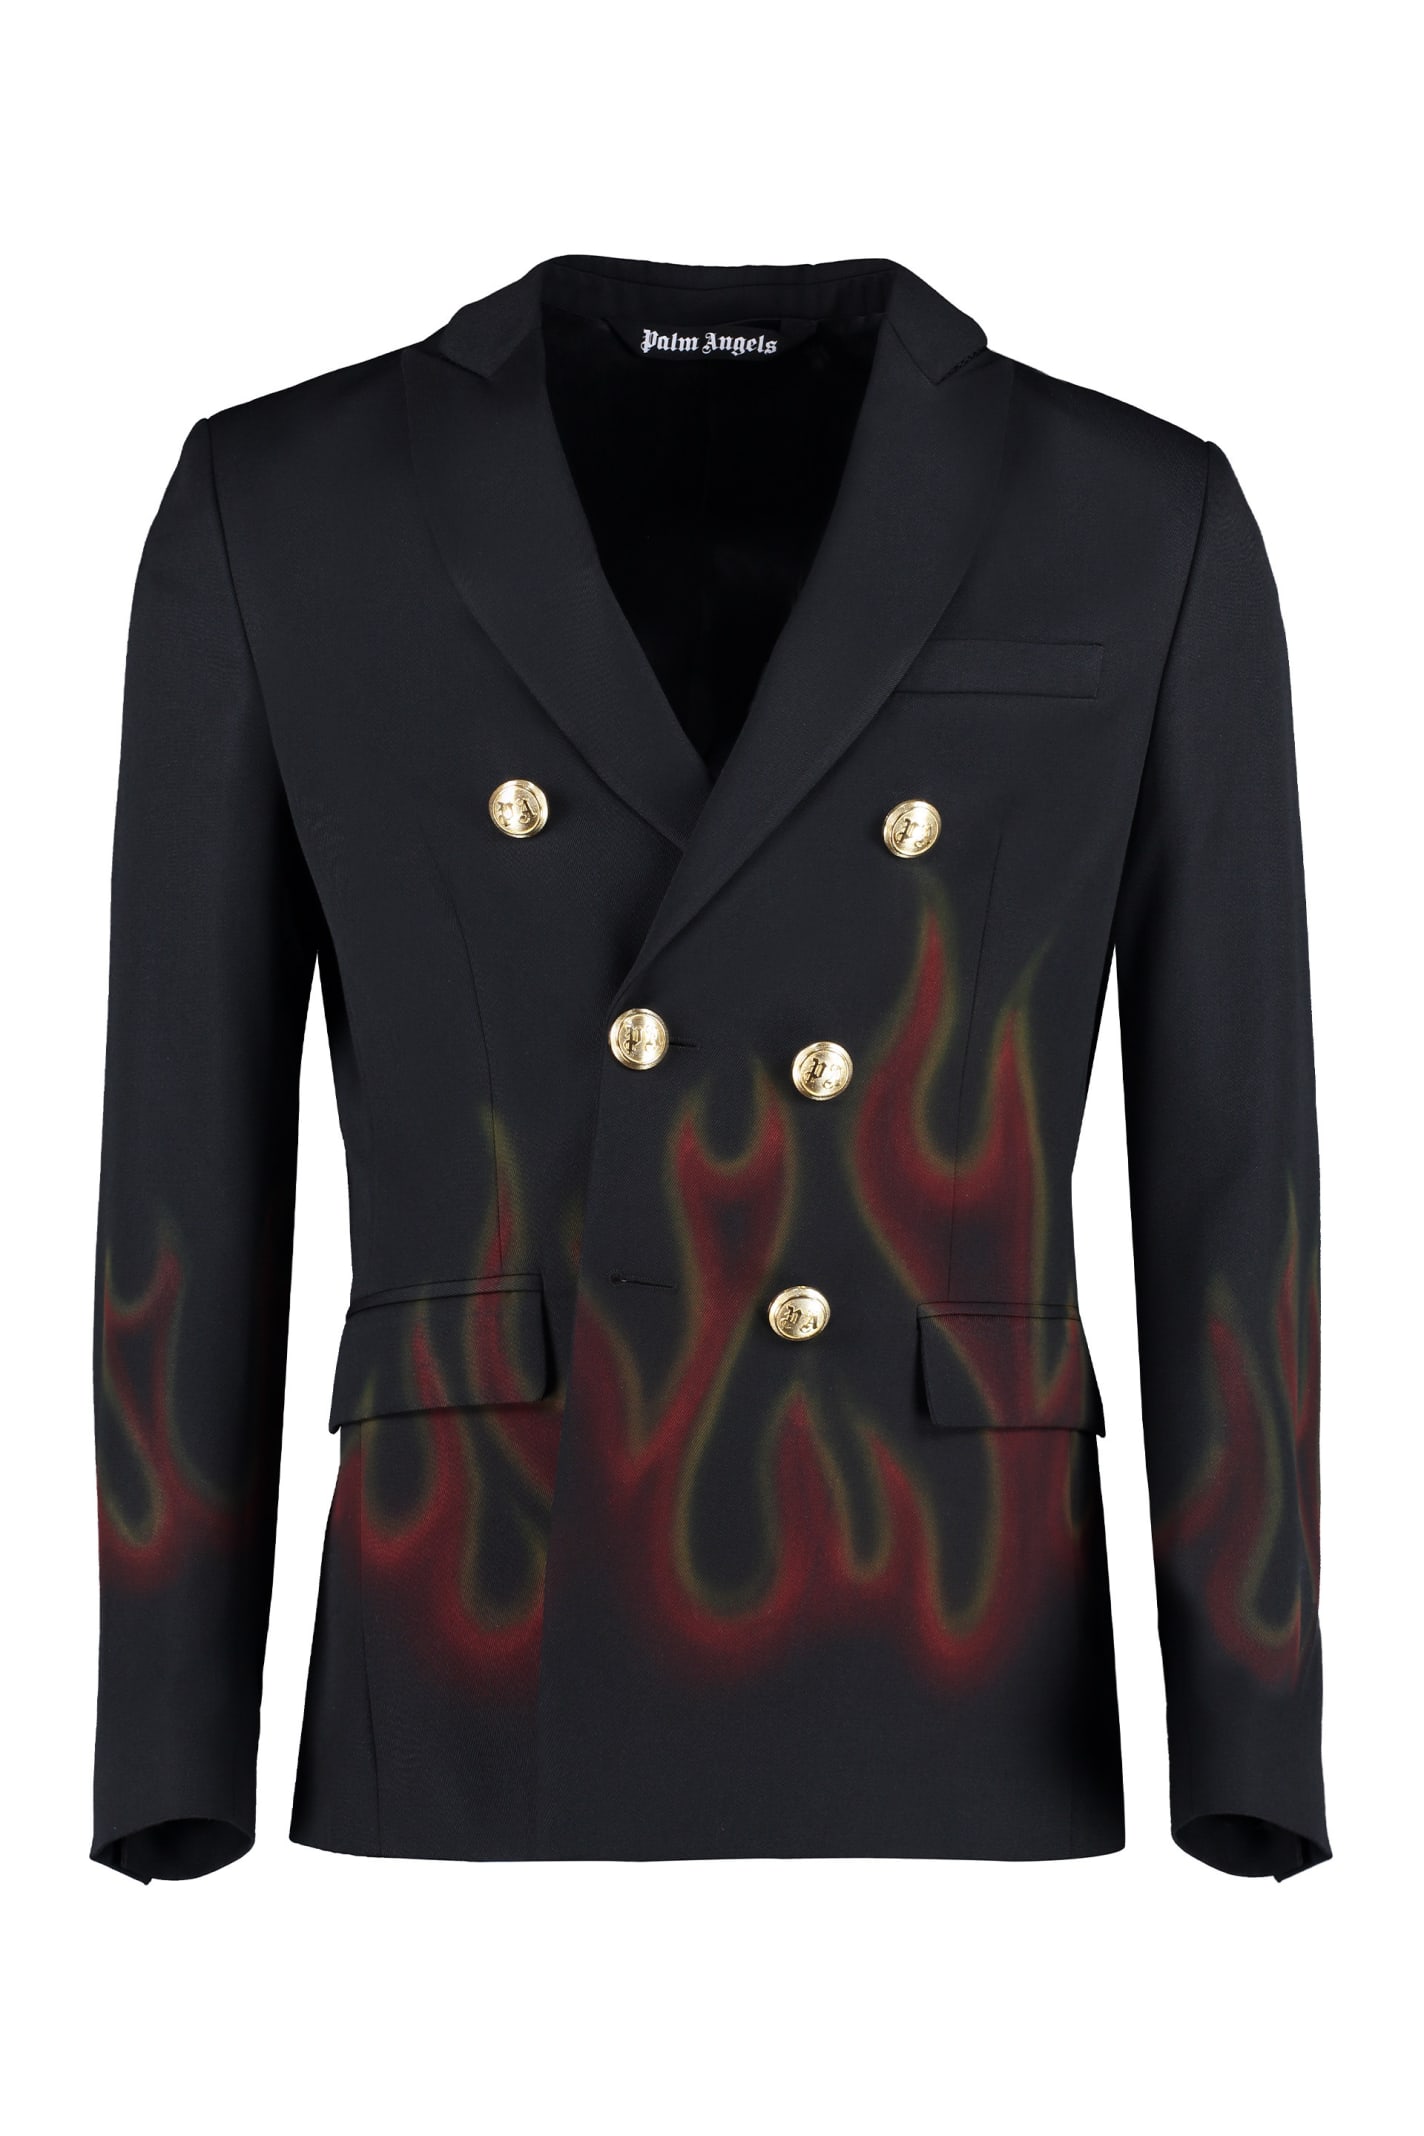 Palm Angels Burning Double-breasted Jacket